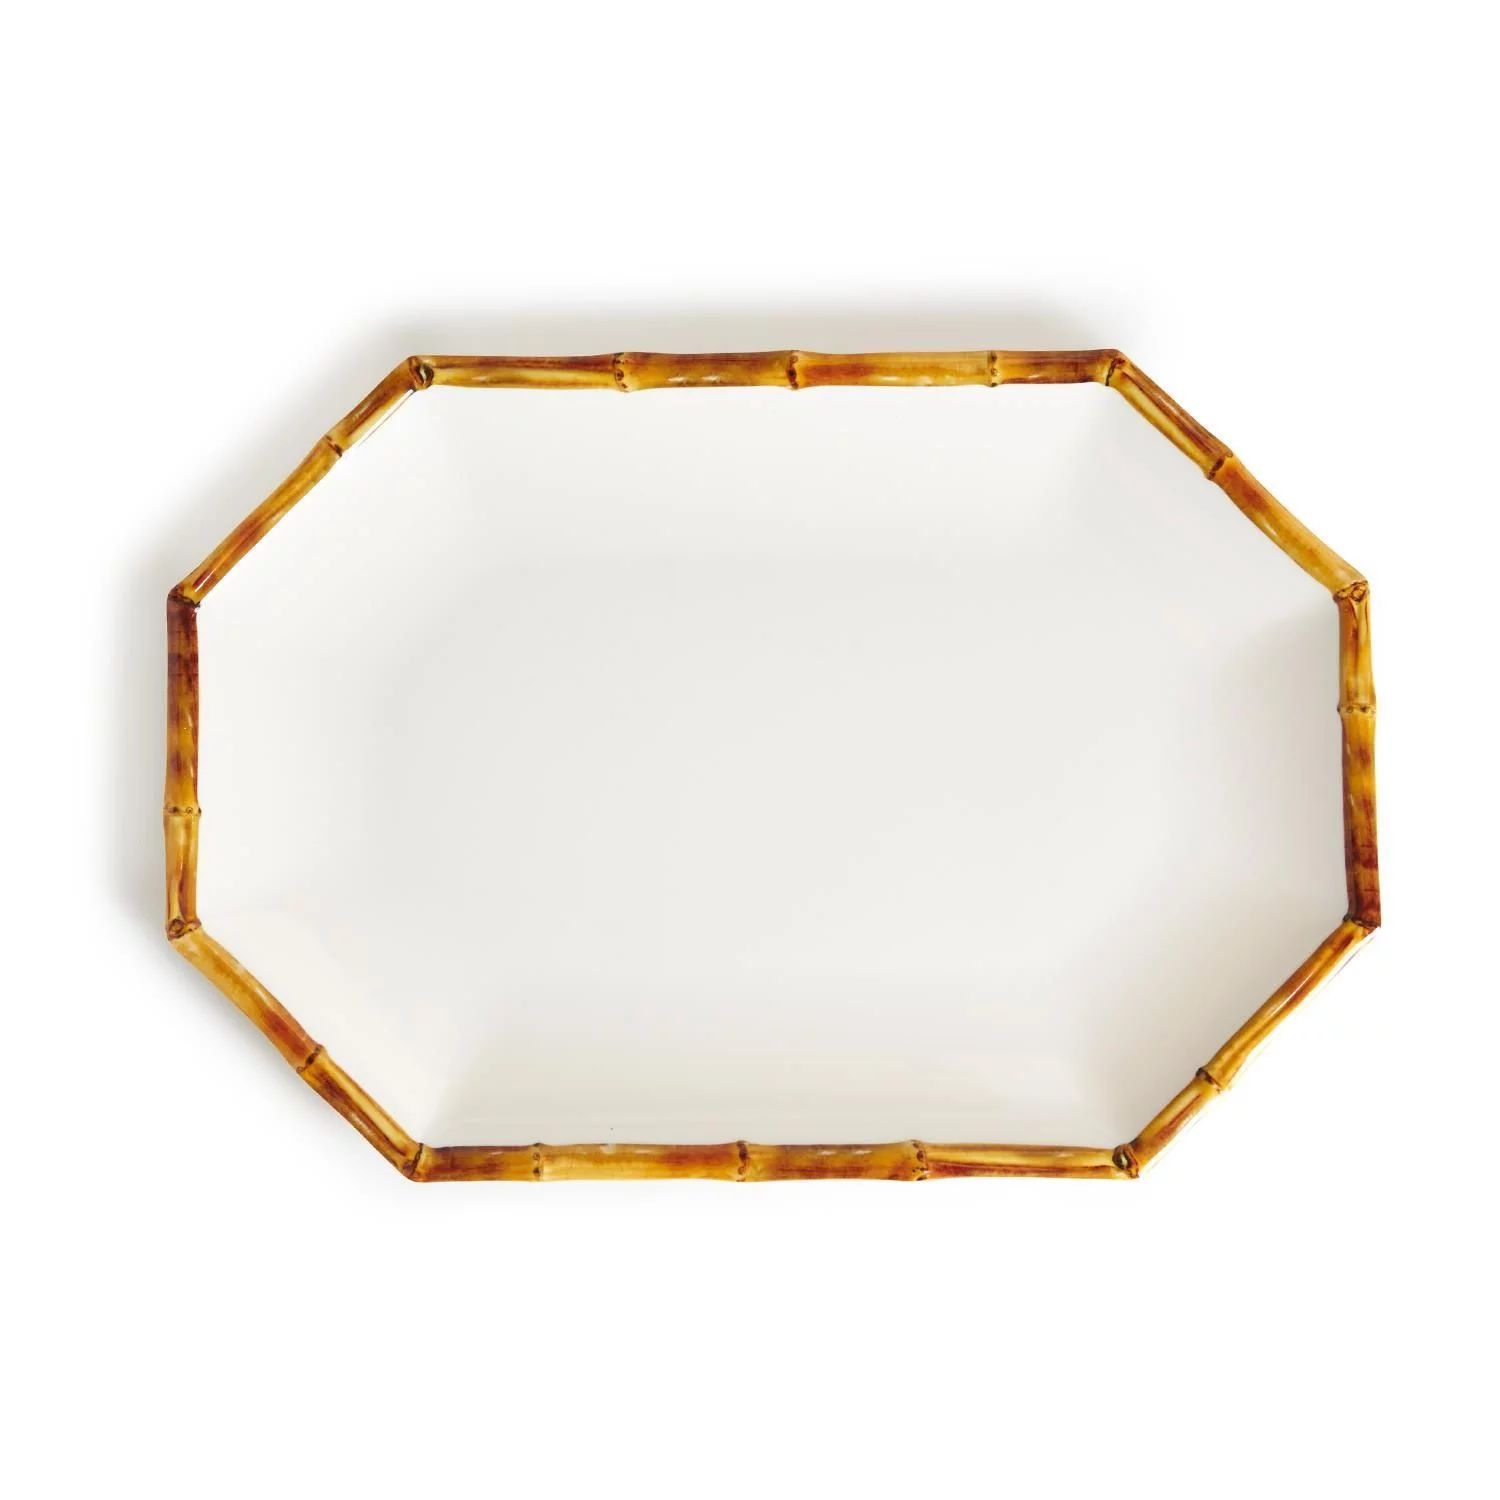 Two's Company Bamboo Touch Octagonal Serving Tray / Platter | Walmart (US)